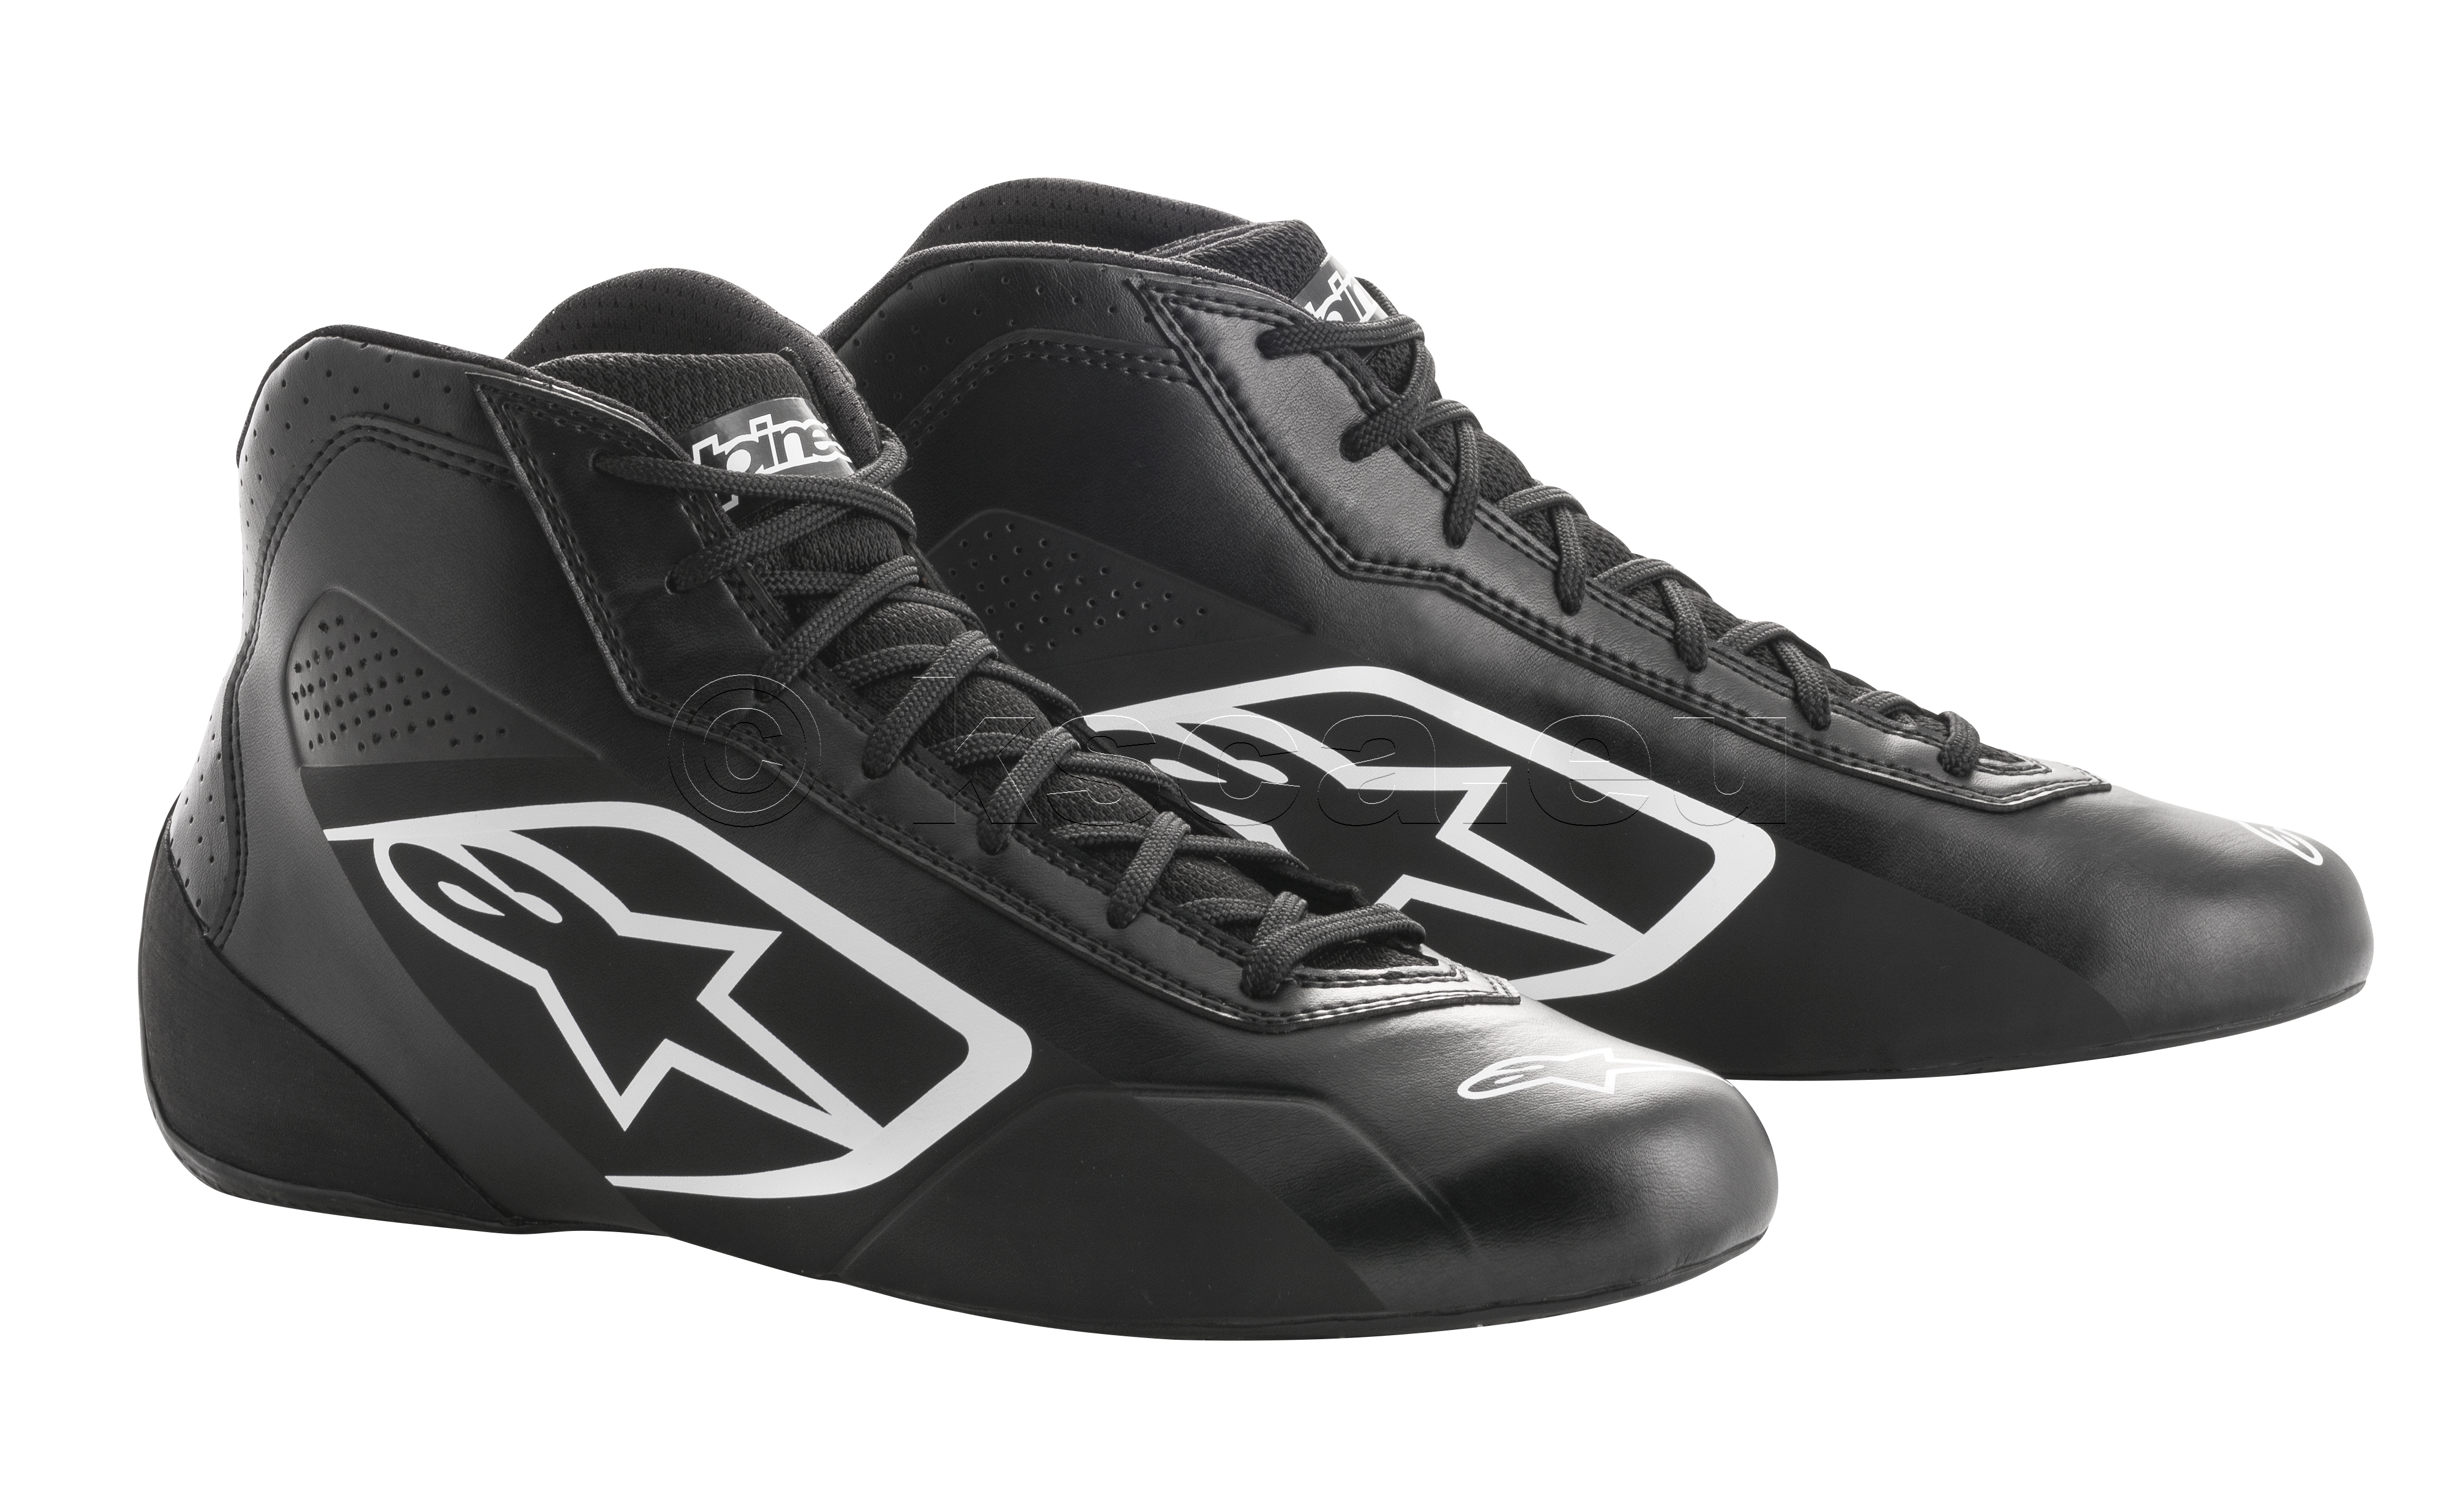 Picture of 2020 Tech-1 K START shoes black/white